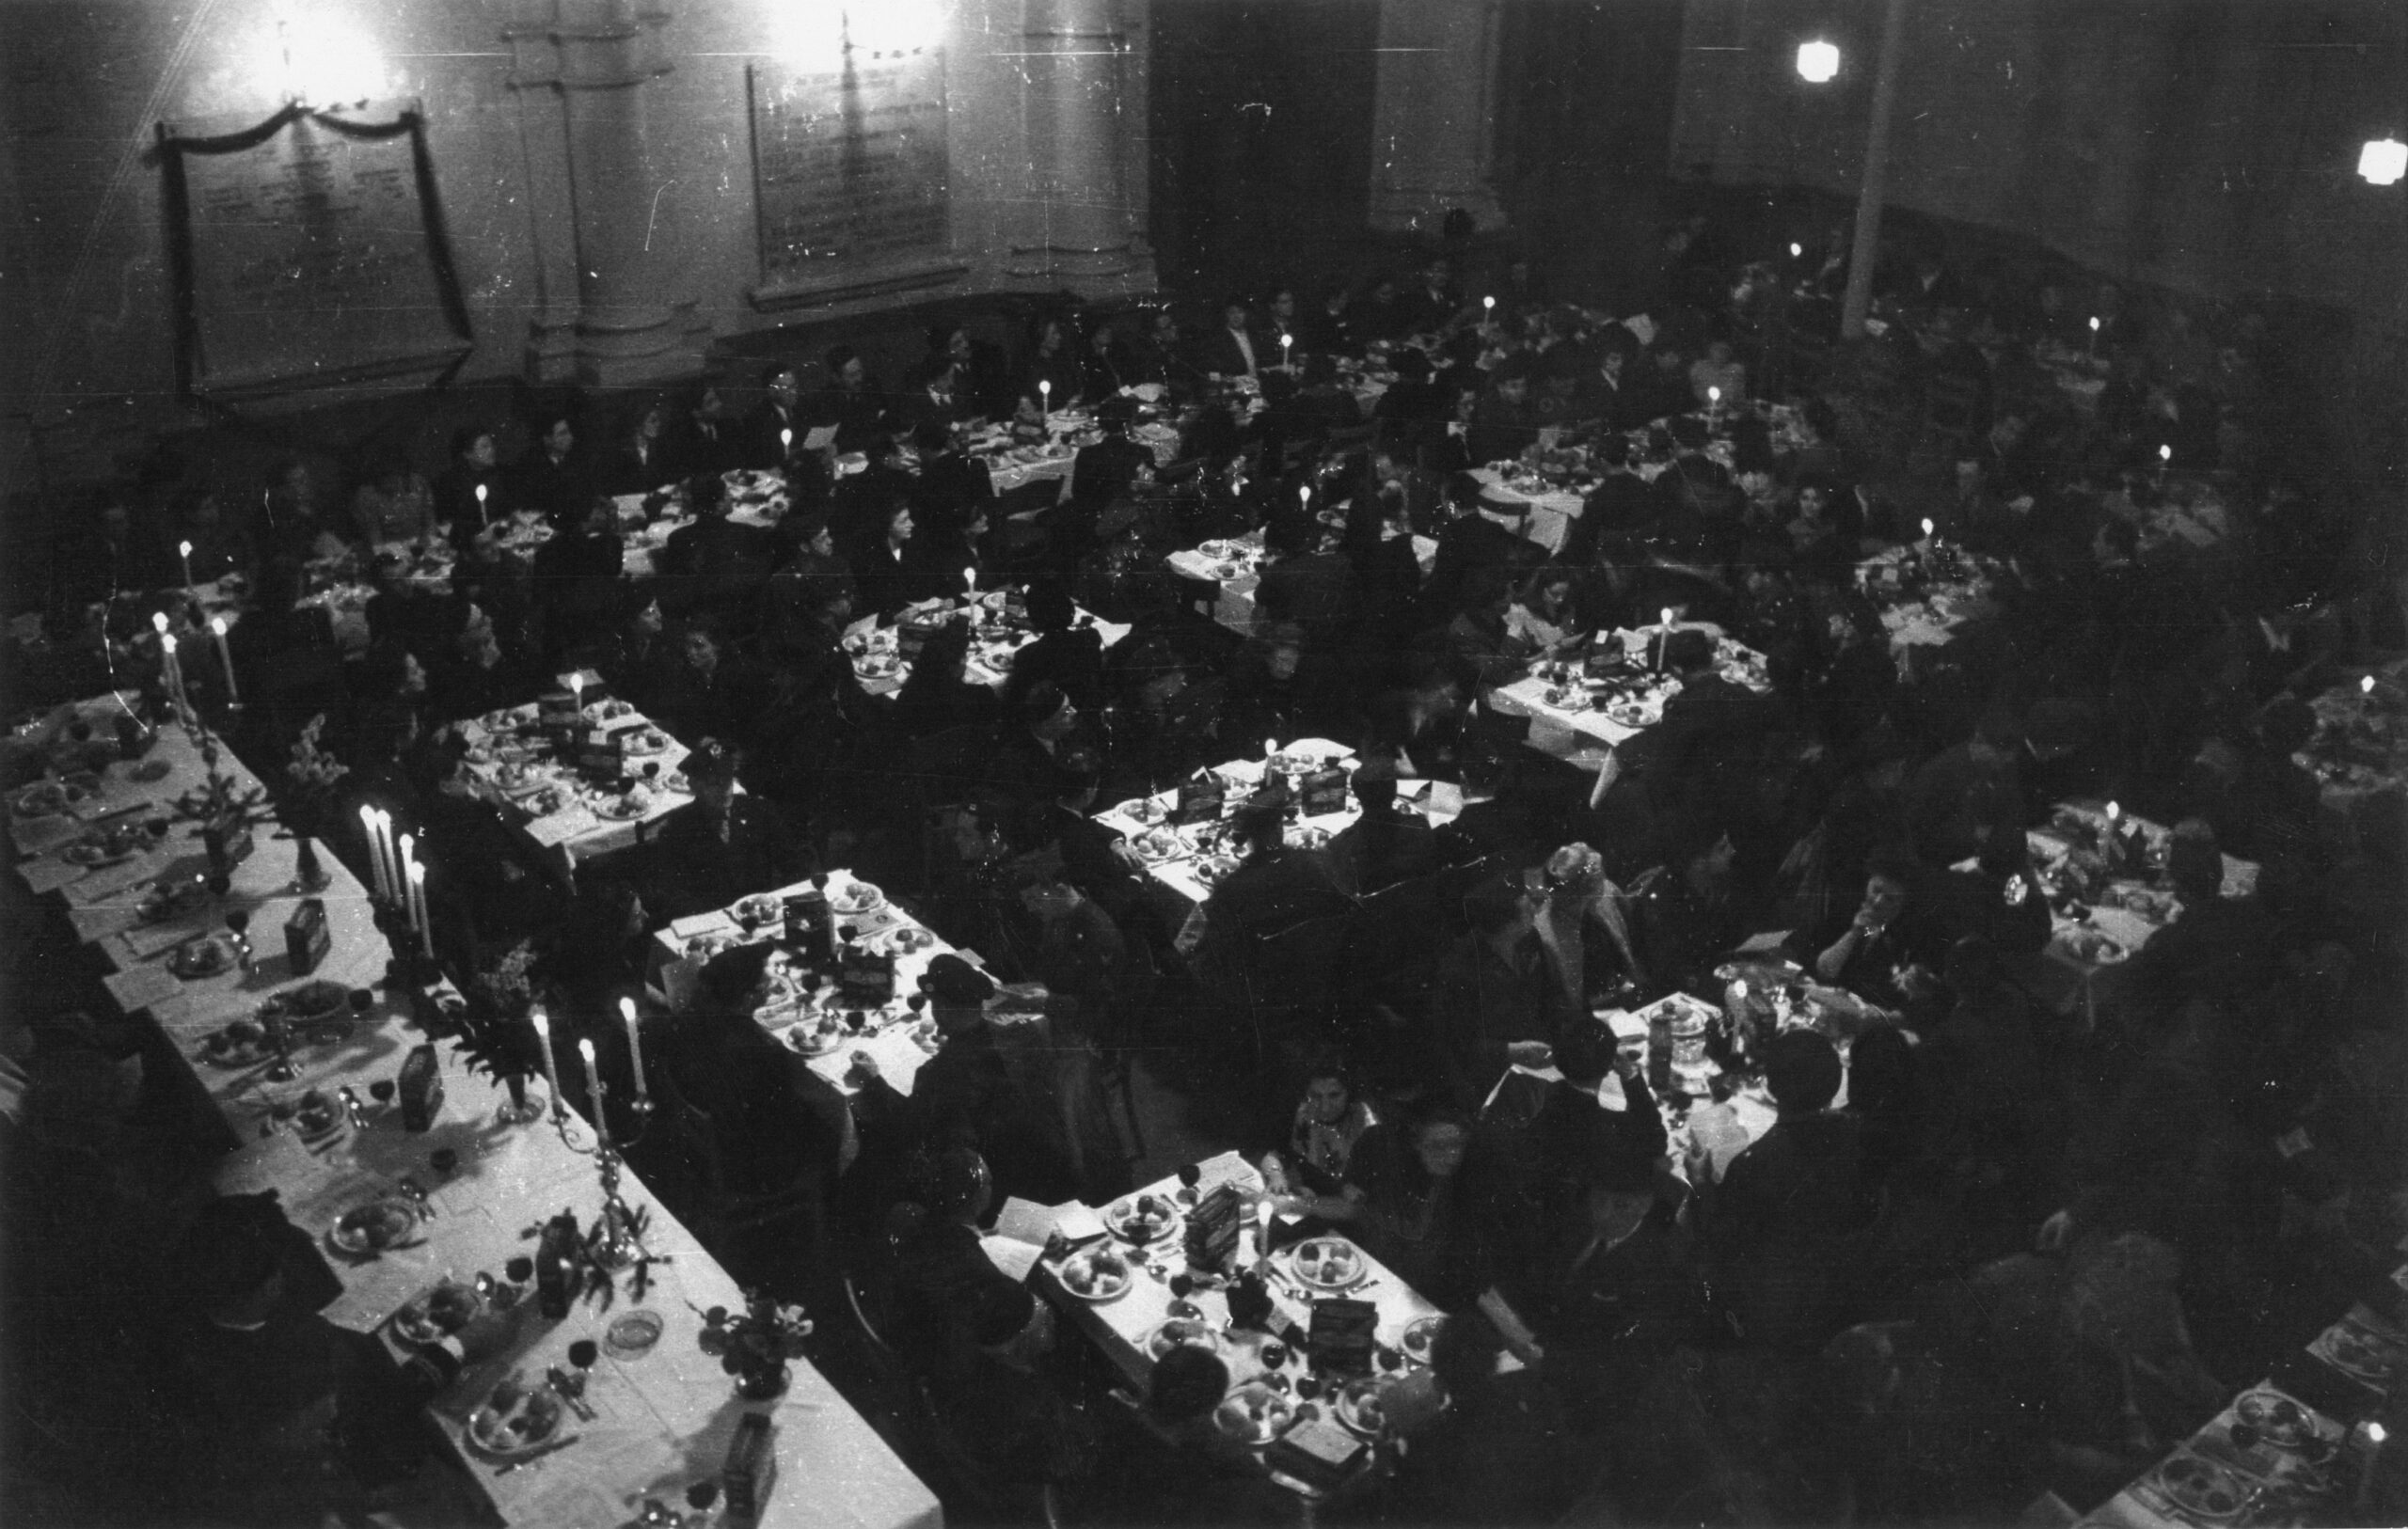 Passover 1947 in the synagogue. Collection Jewish Community Wiesbaden